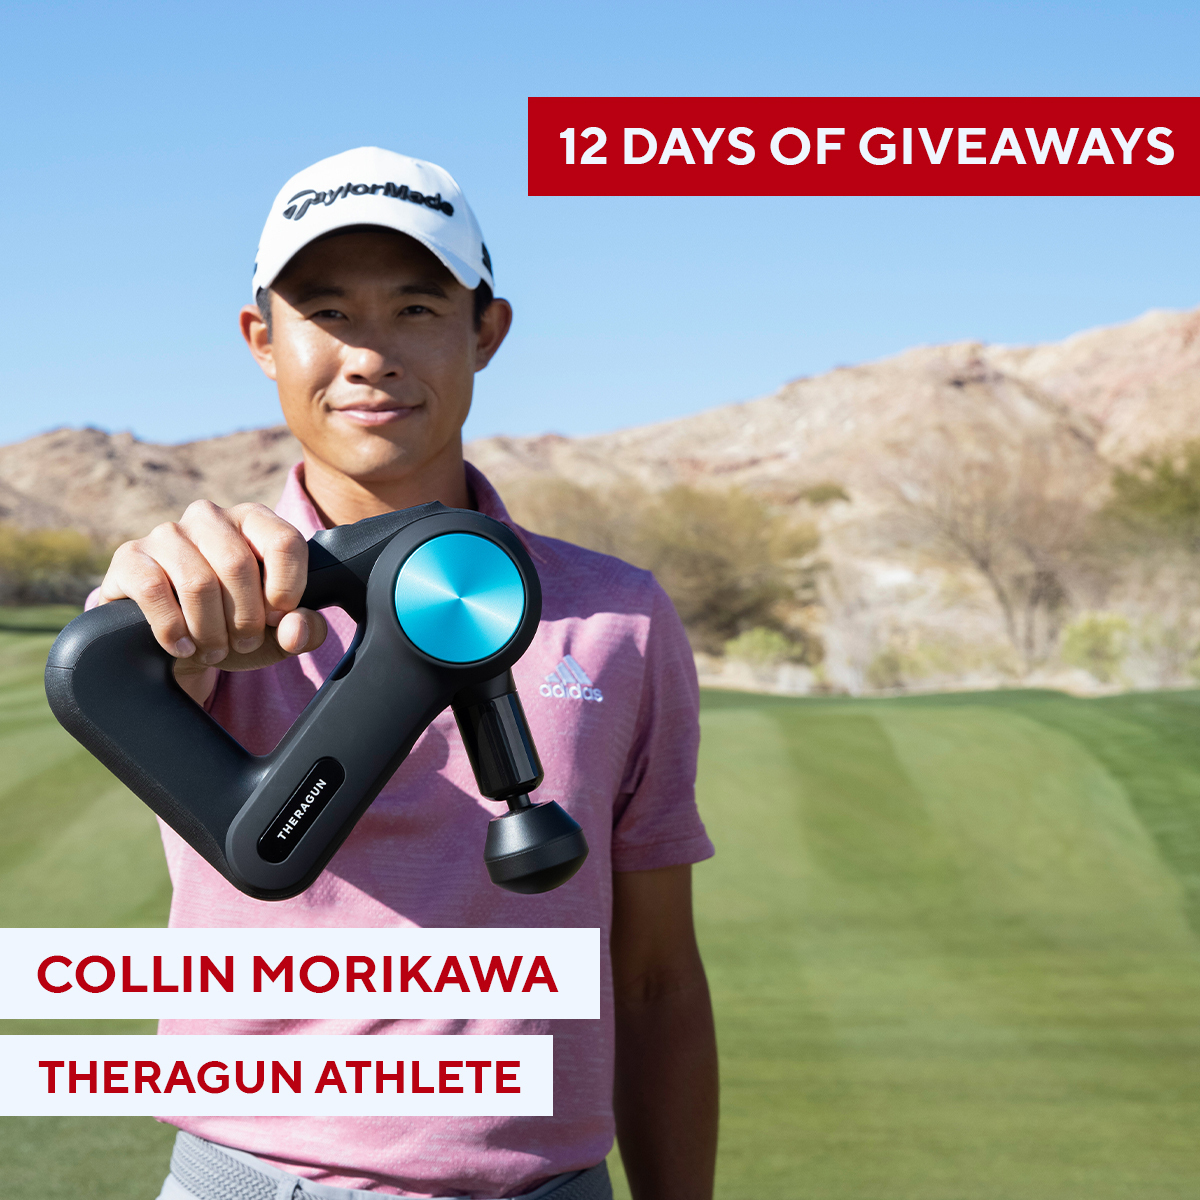 Swinging into Day 6 of our 12 Days of Giveaways with Collin Morikawa! Get Collin's ultimate #Therabody combo featuring #Theragun PRO, #Theragun mini and Wave Solo. Visit our Instagram to enter: https://t.co/qddDFLe0Ph https://t.co/D8f62hPWAL